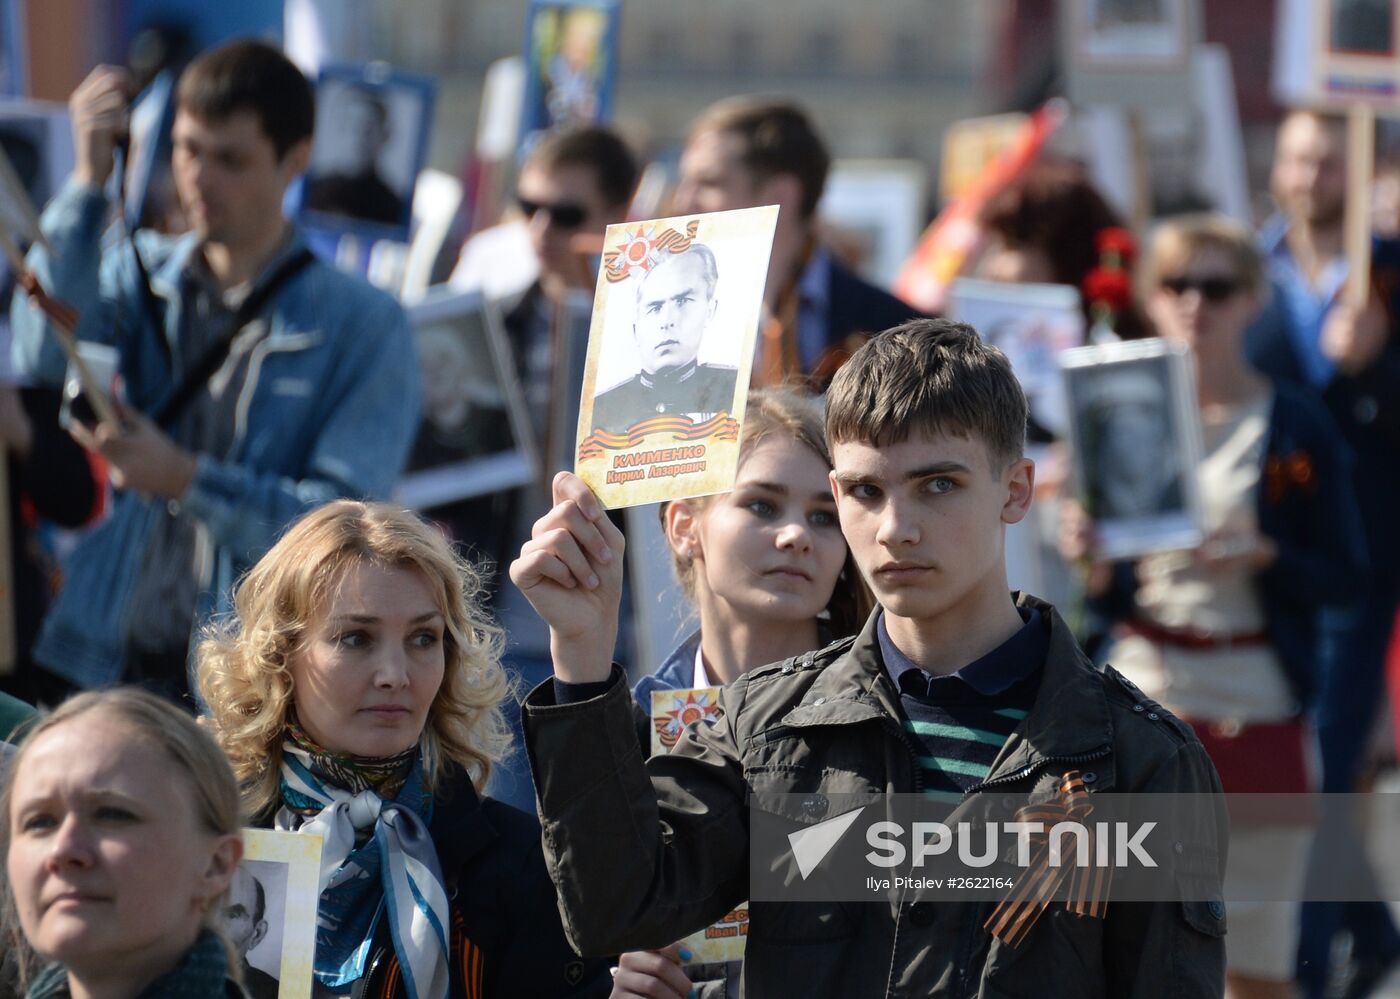 March of Immortal Regiment Moscow regional patriotic public organization on Red Square